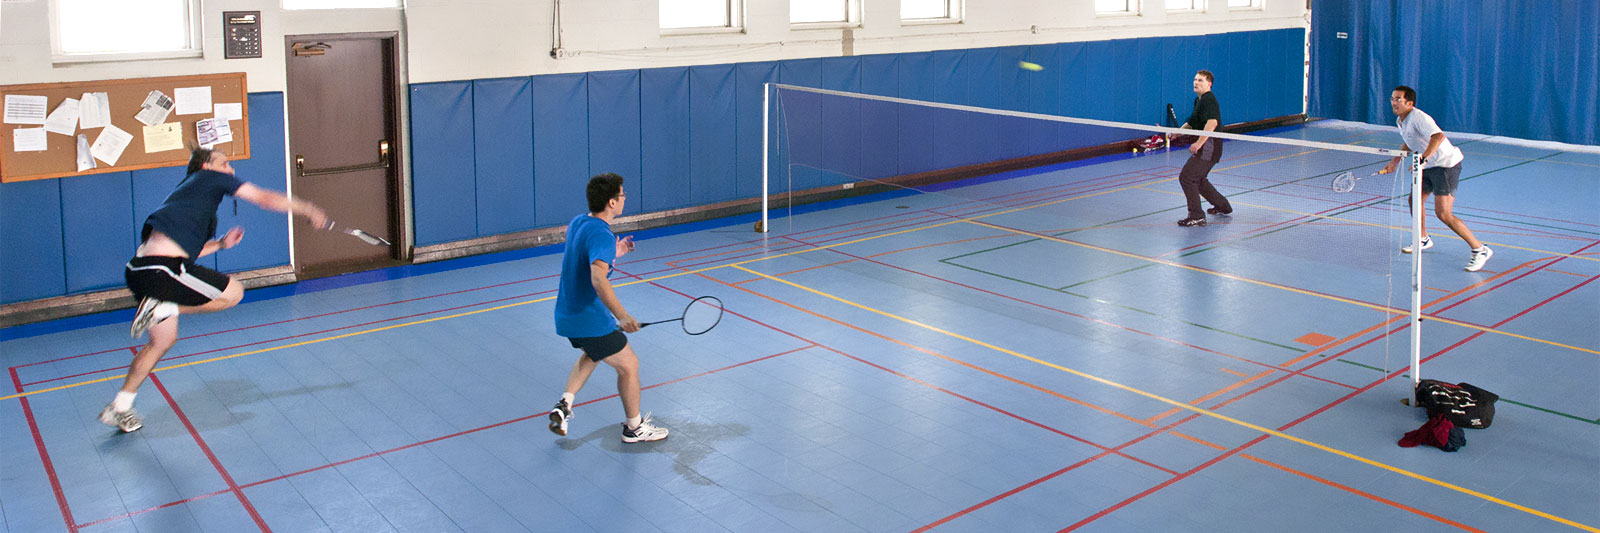 photo of men playing badminton in a gym